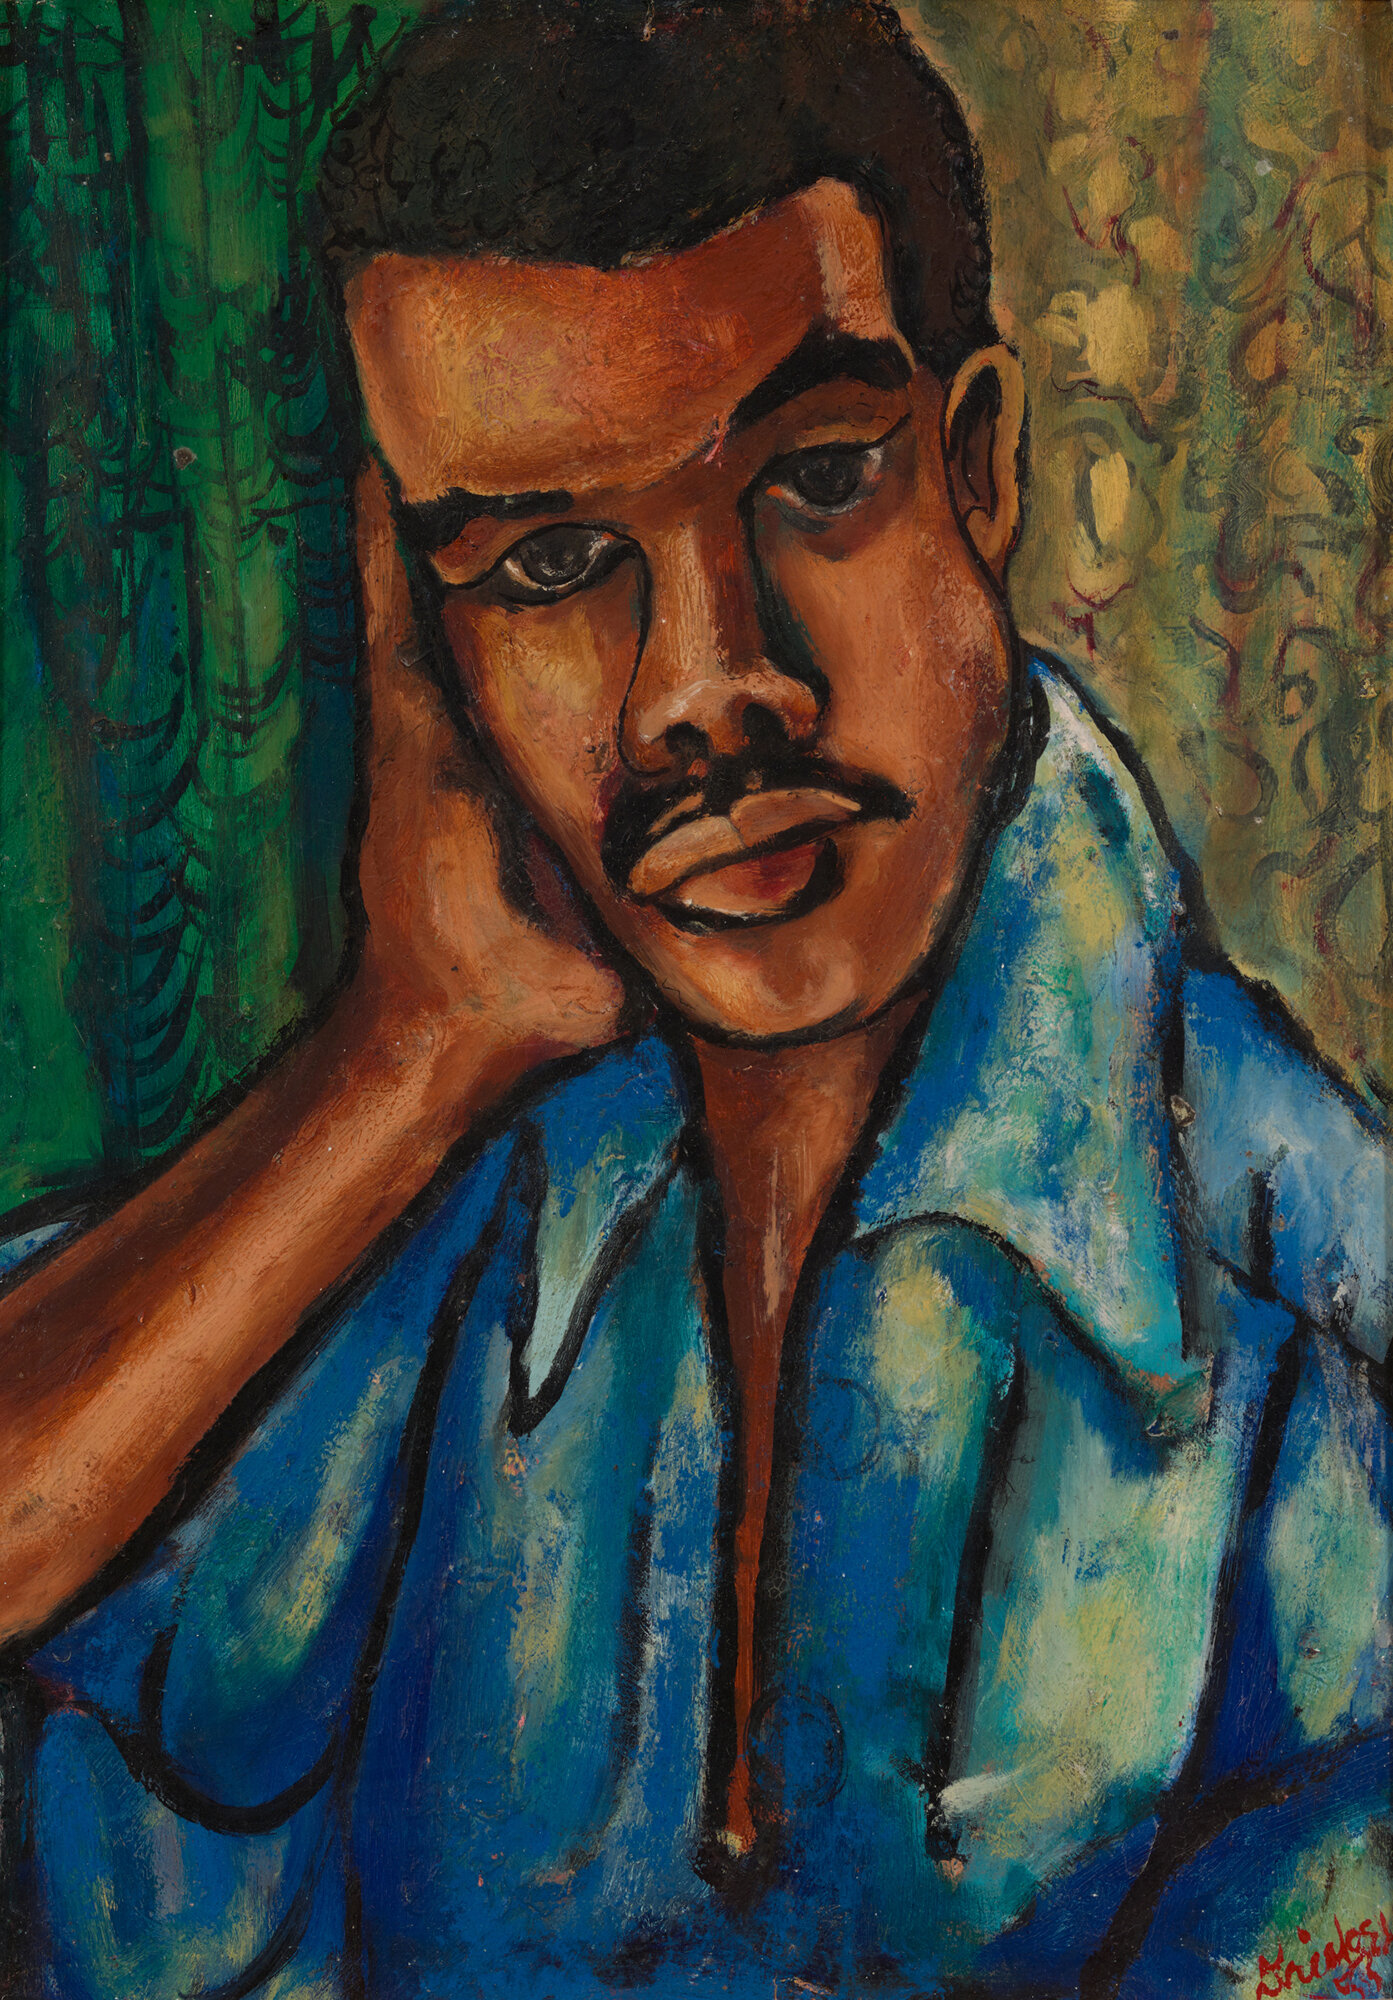  David C. Driskell (United States, 1931–2020),  Self-Portrait , 1953, oil on board, 15 1/4 x 11 inches. Collection of the Estate of David C. Driskell, Maryland. Photograph by Luc Demers. © Estate of David C. Driskell, courtesy DC Moore Gallery, New Y